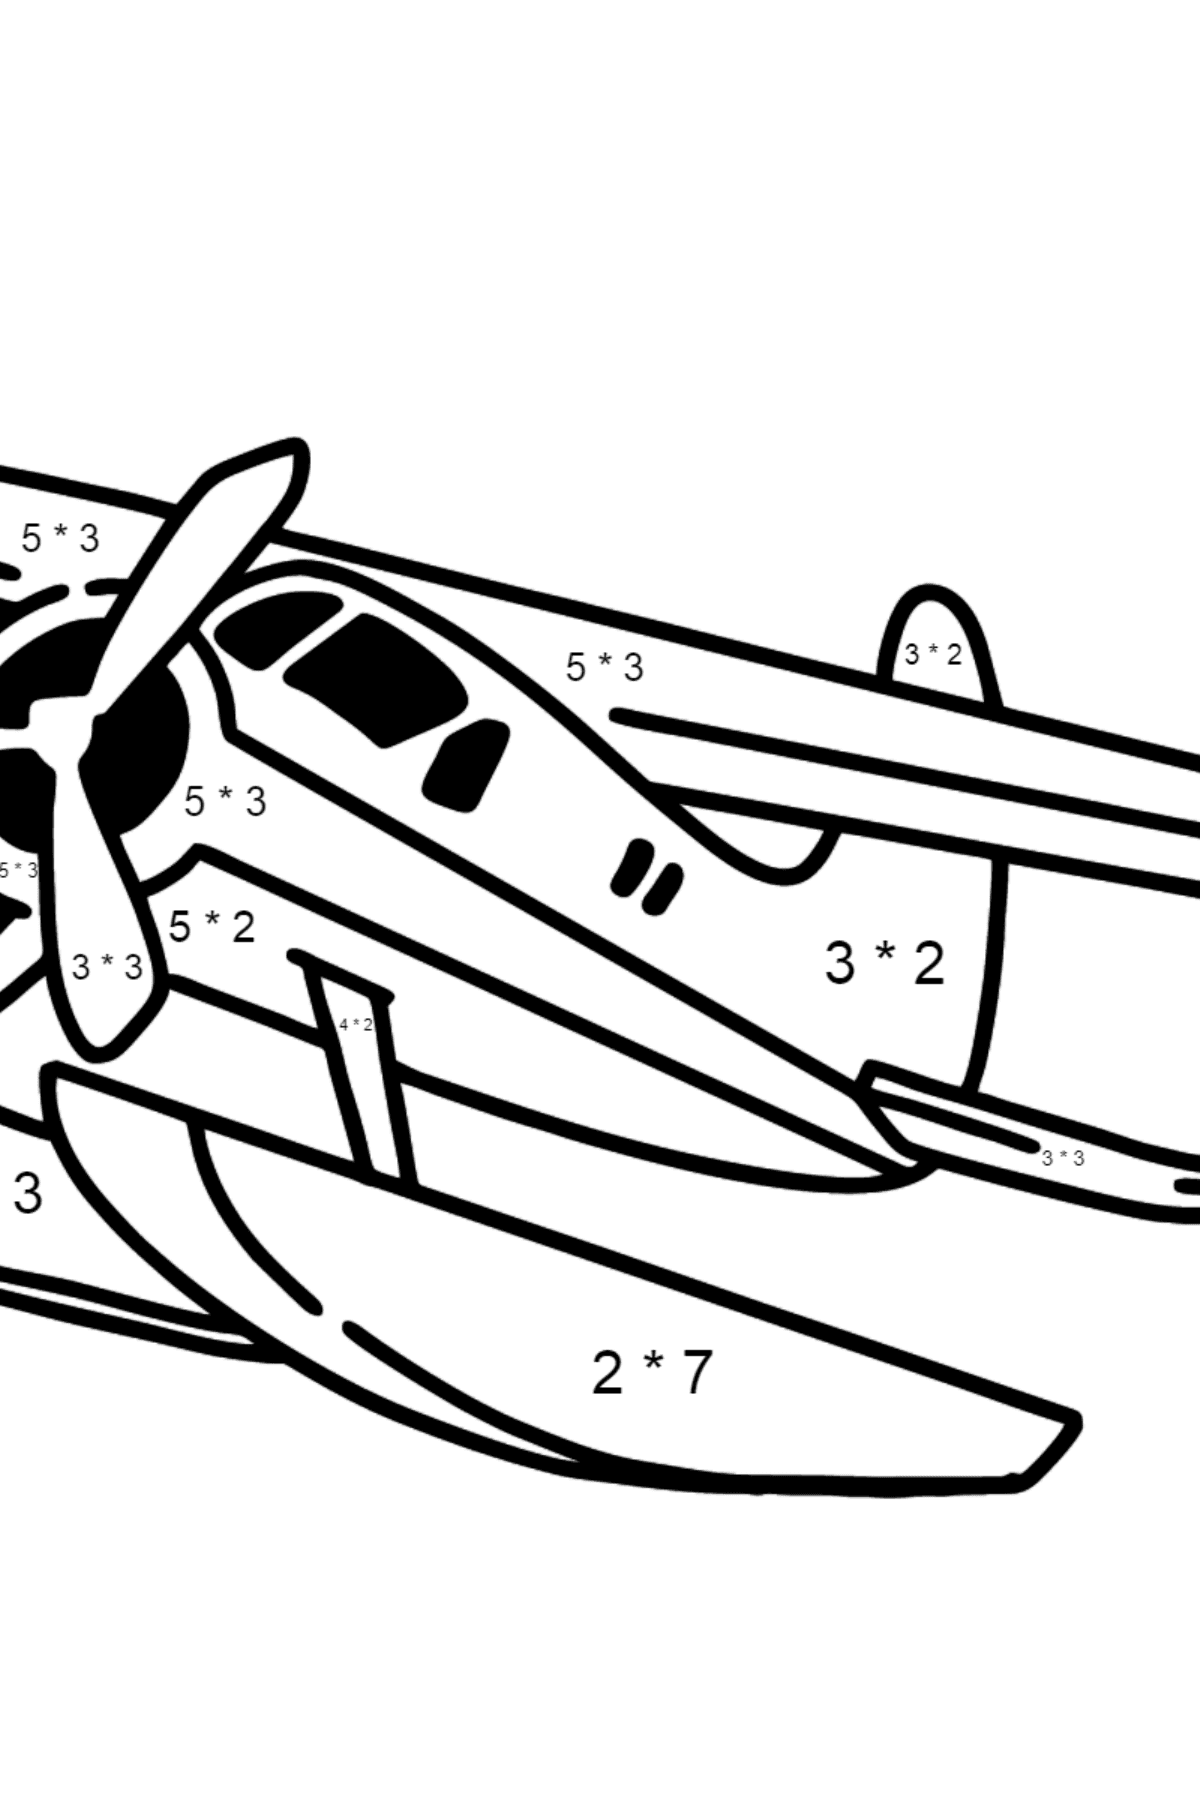 Jet Airplane BE-200 coloring page - Math Coloring - Multiplication for Kids